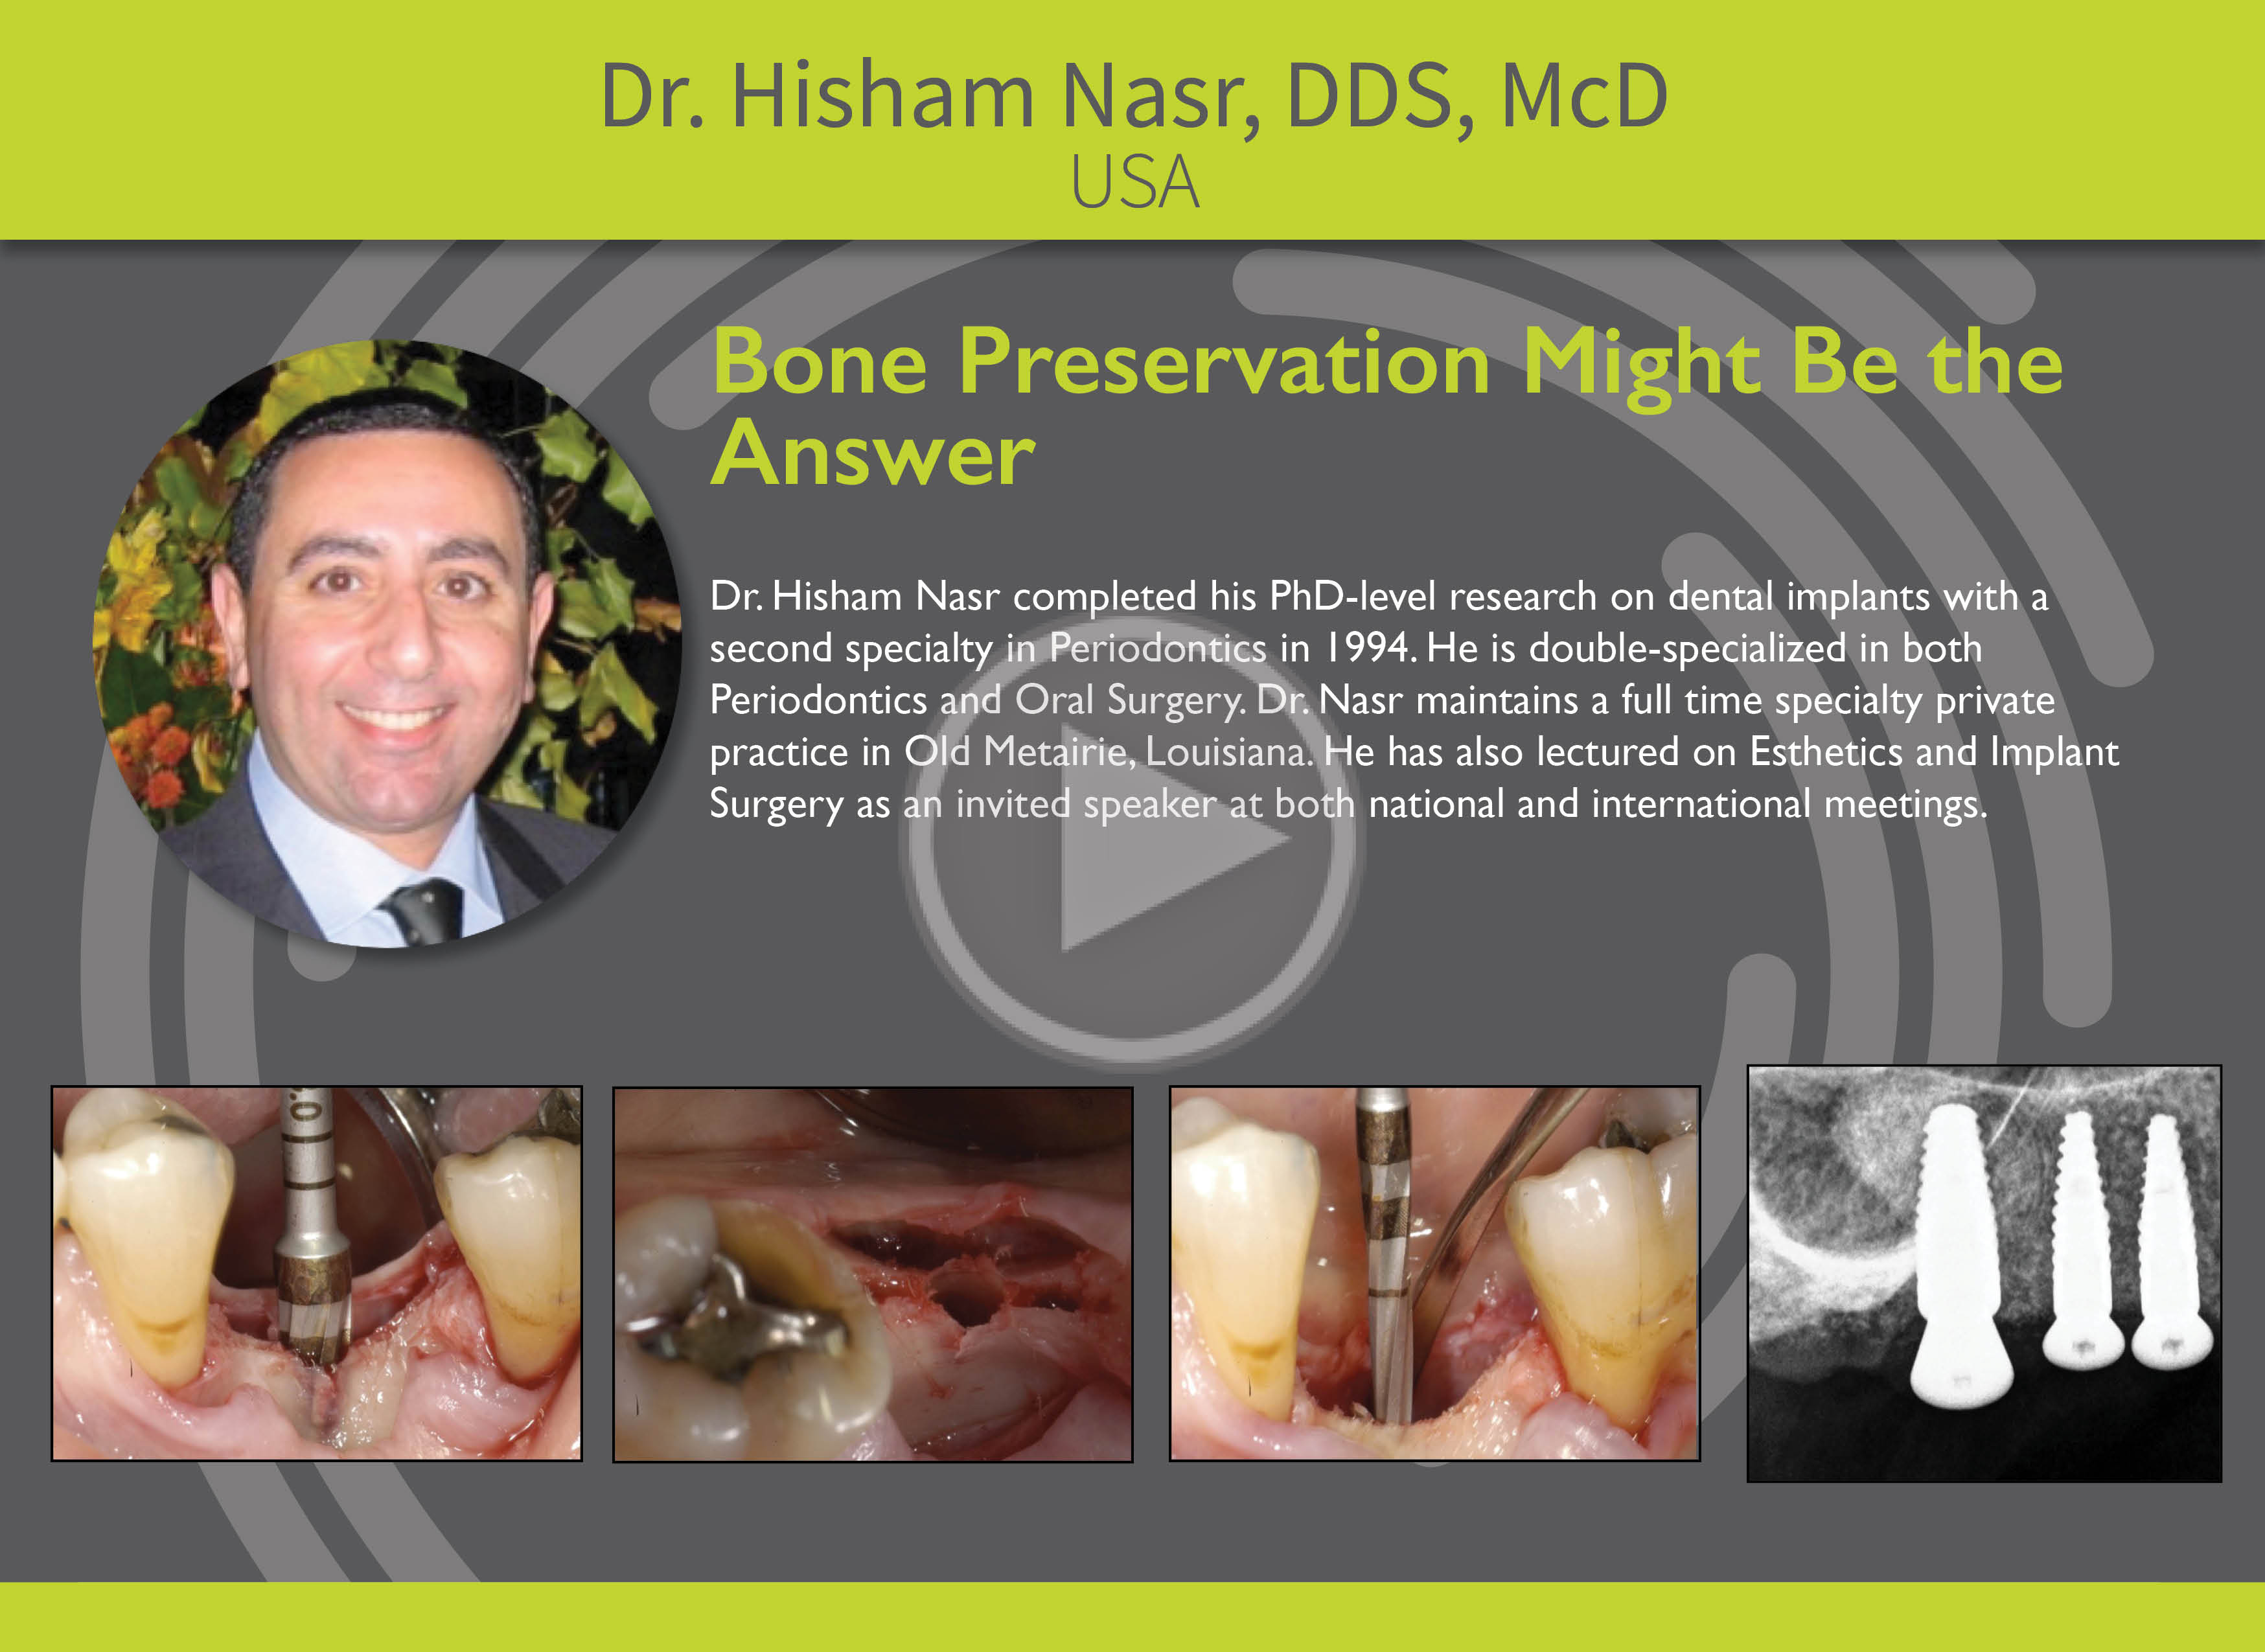 Bone Preservation Might Be the Answer